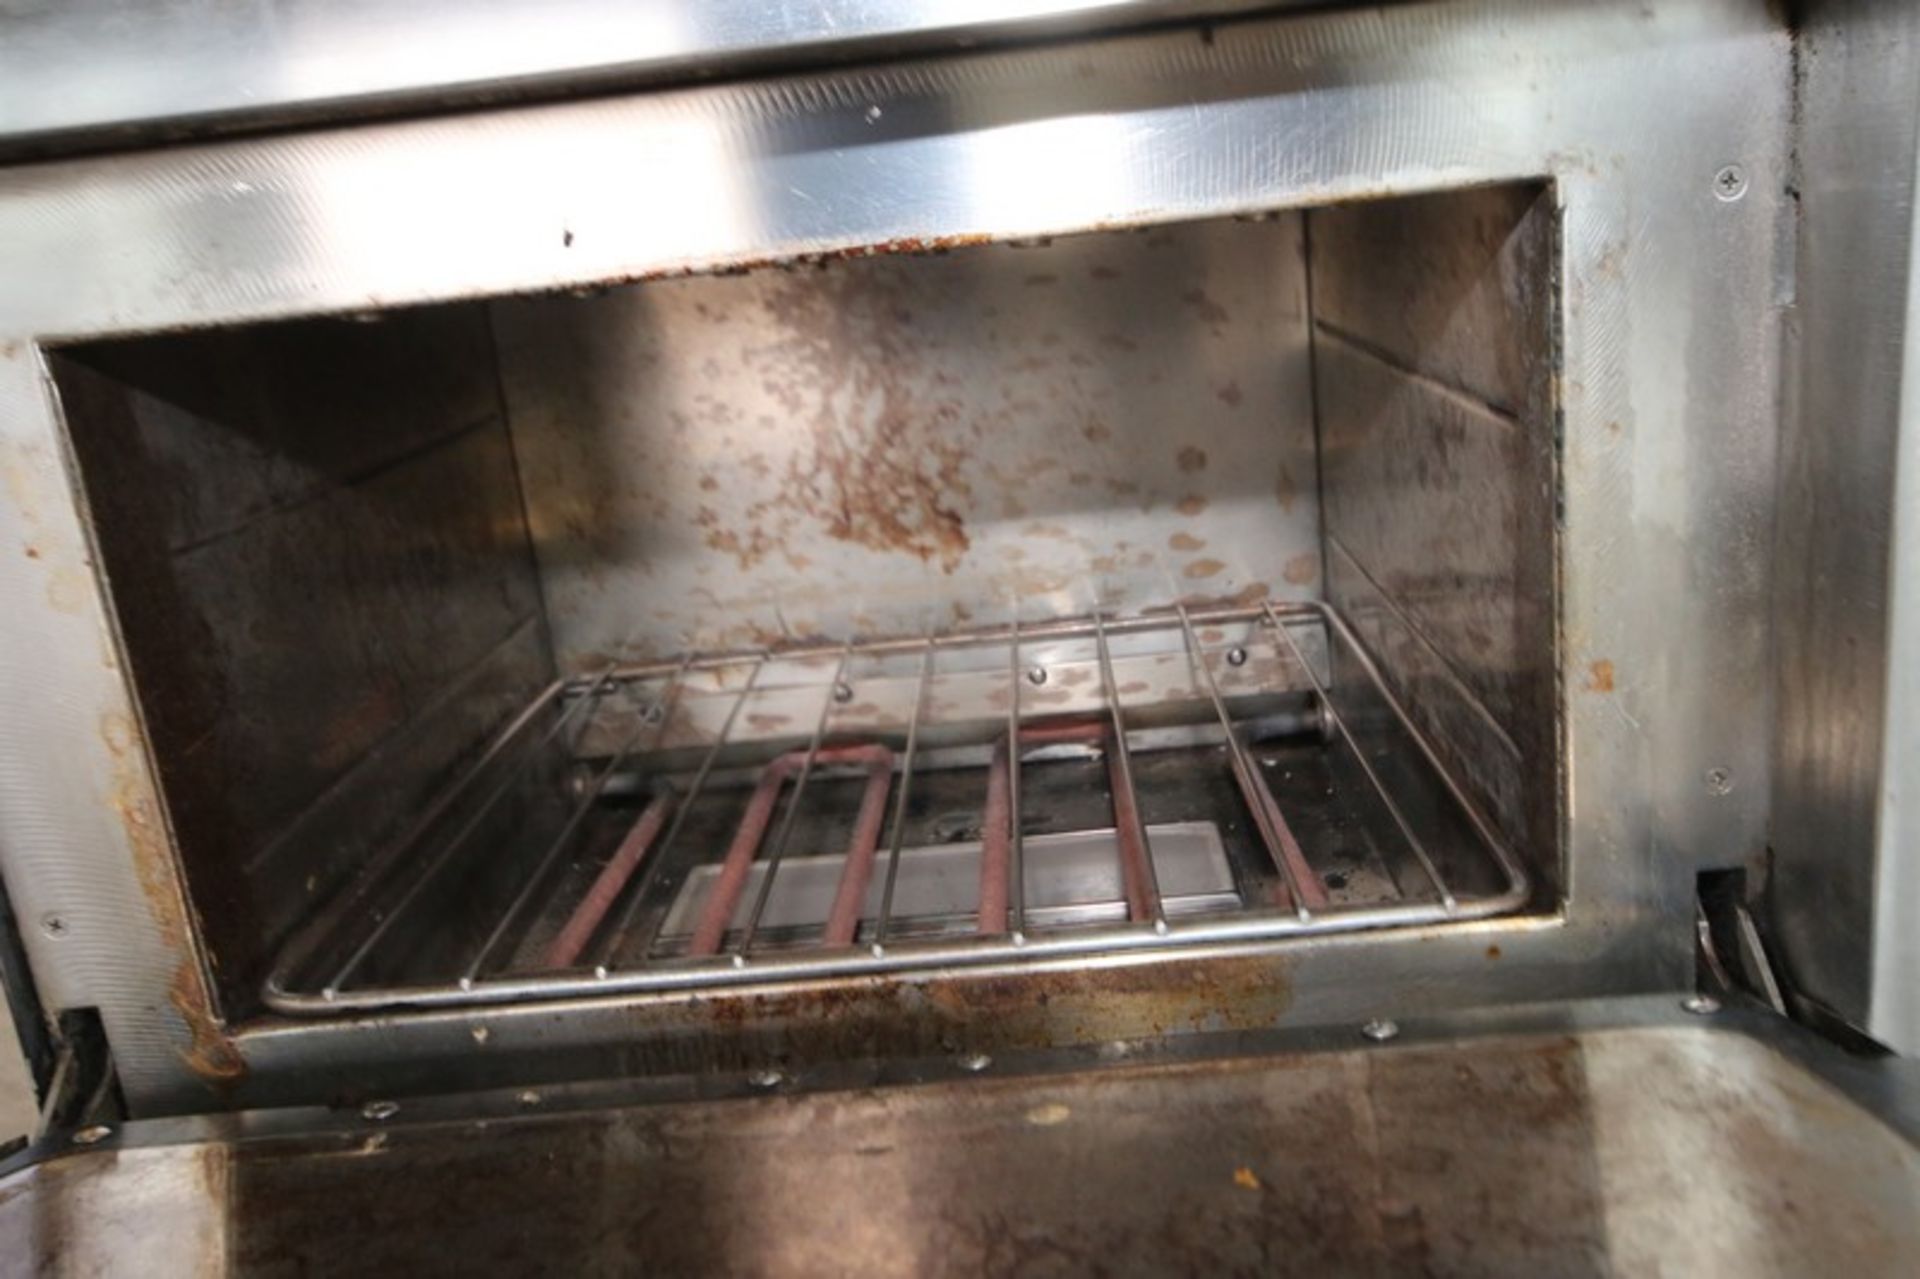 Turbo Chef Technologies Inc. Rapid Cook Oven, S/N NCCD6DO1898, 230/240 Volts, Microwave Input: - Image 3 of 6